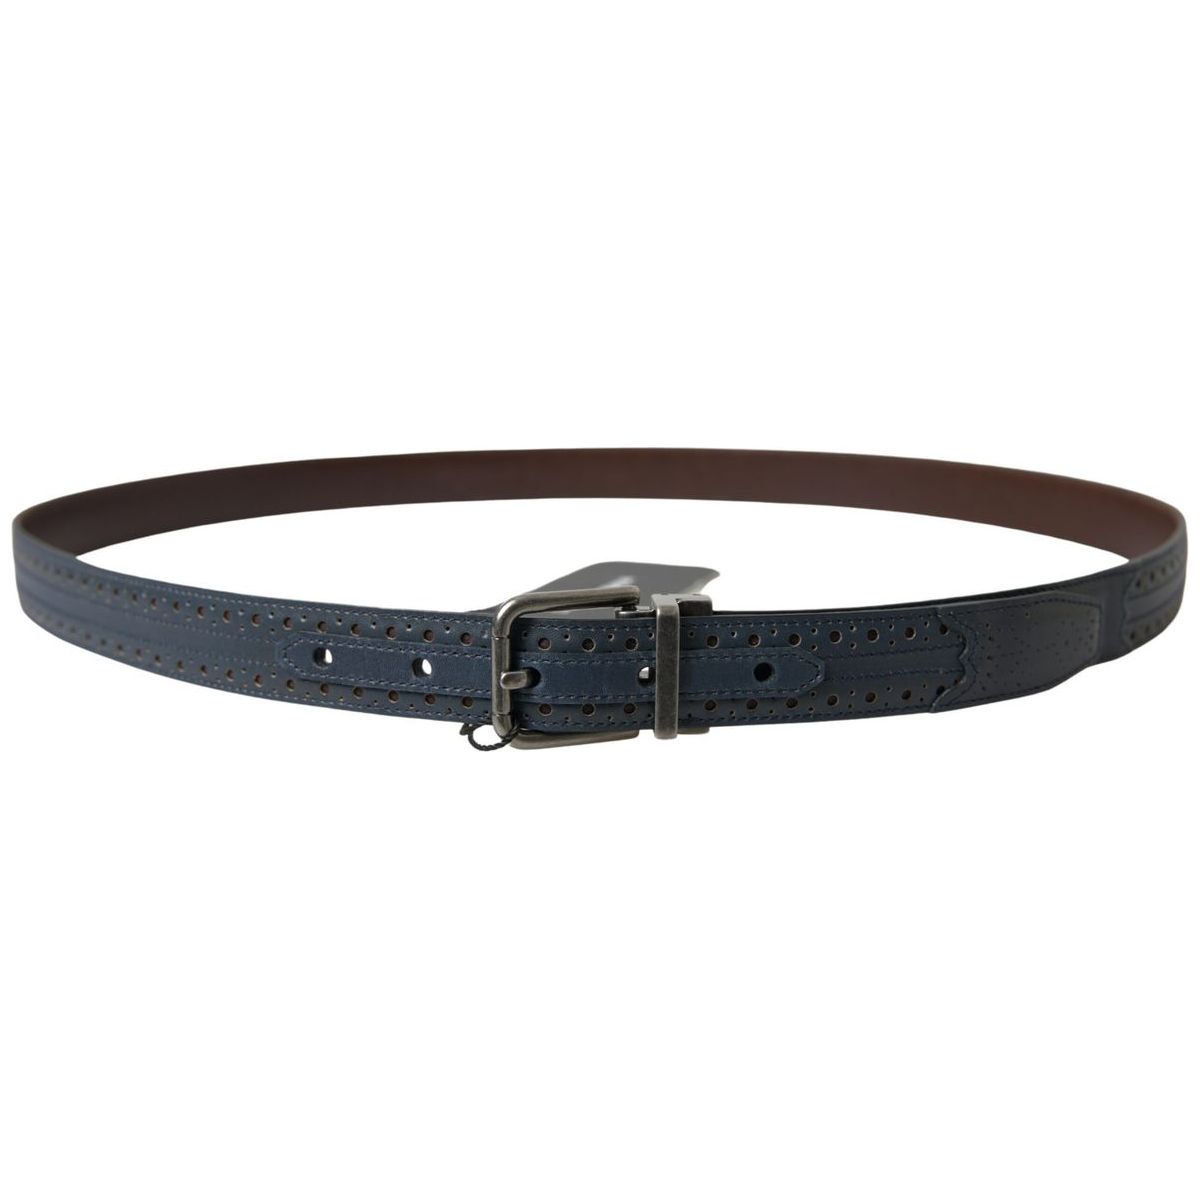 Dolce & Gabbana Elegant Blue Leather Belt with Metal Buckle MAN BELTS blue-leather-perforated-metal-buckle-belt 465A5250-scaled-8d5b6f3f-fcd.jpg